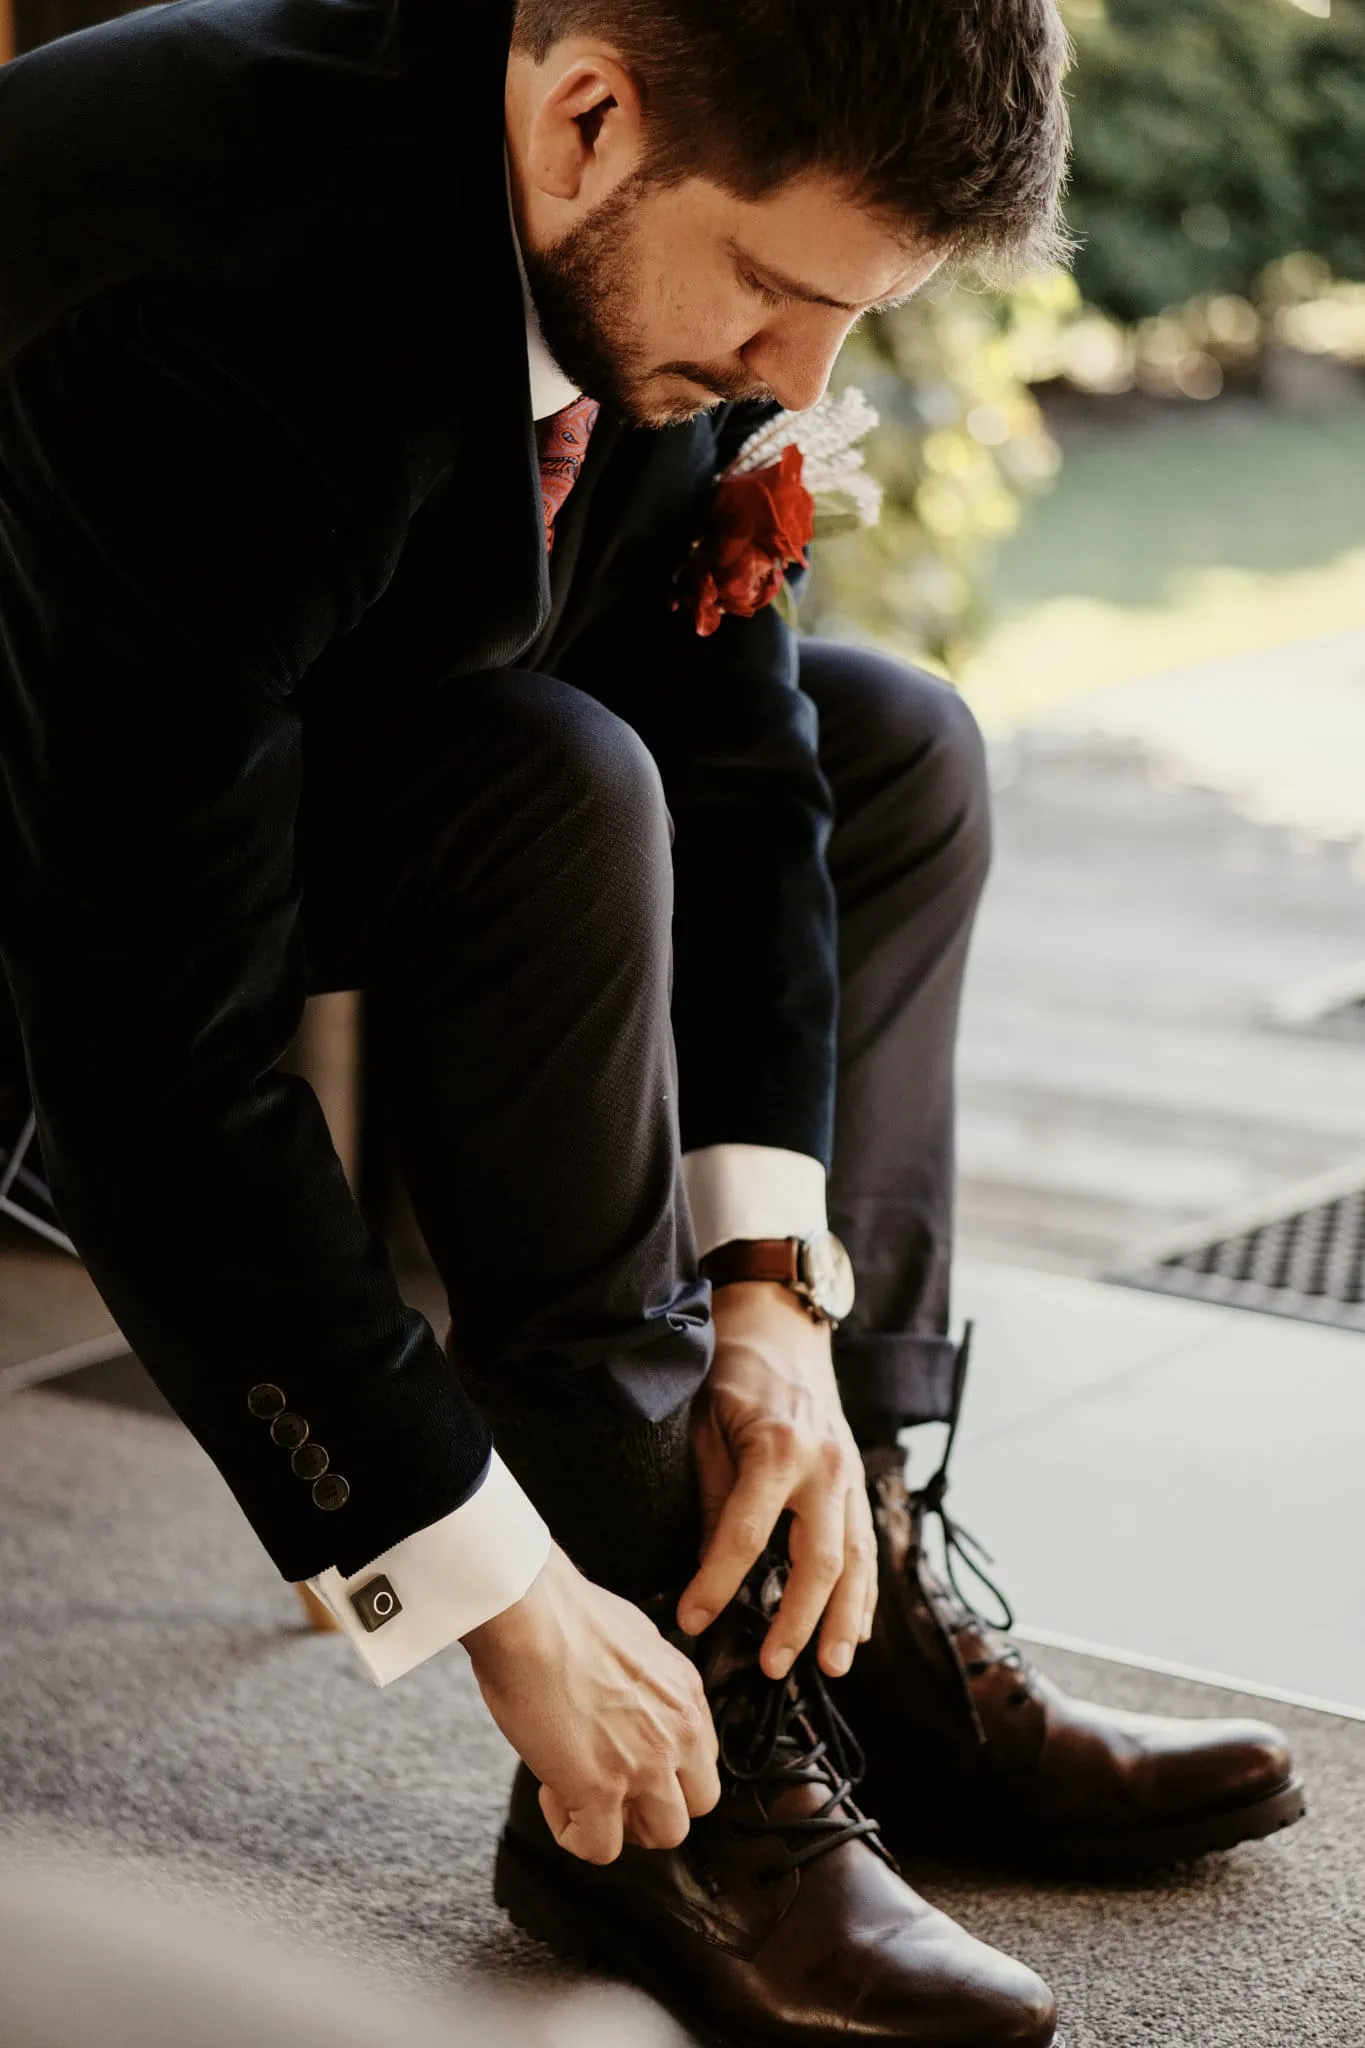 A man in a suit tying his shoes at Claire and Rob's Heli Elopement Wedding at Cecil Peak.